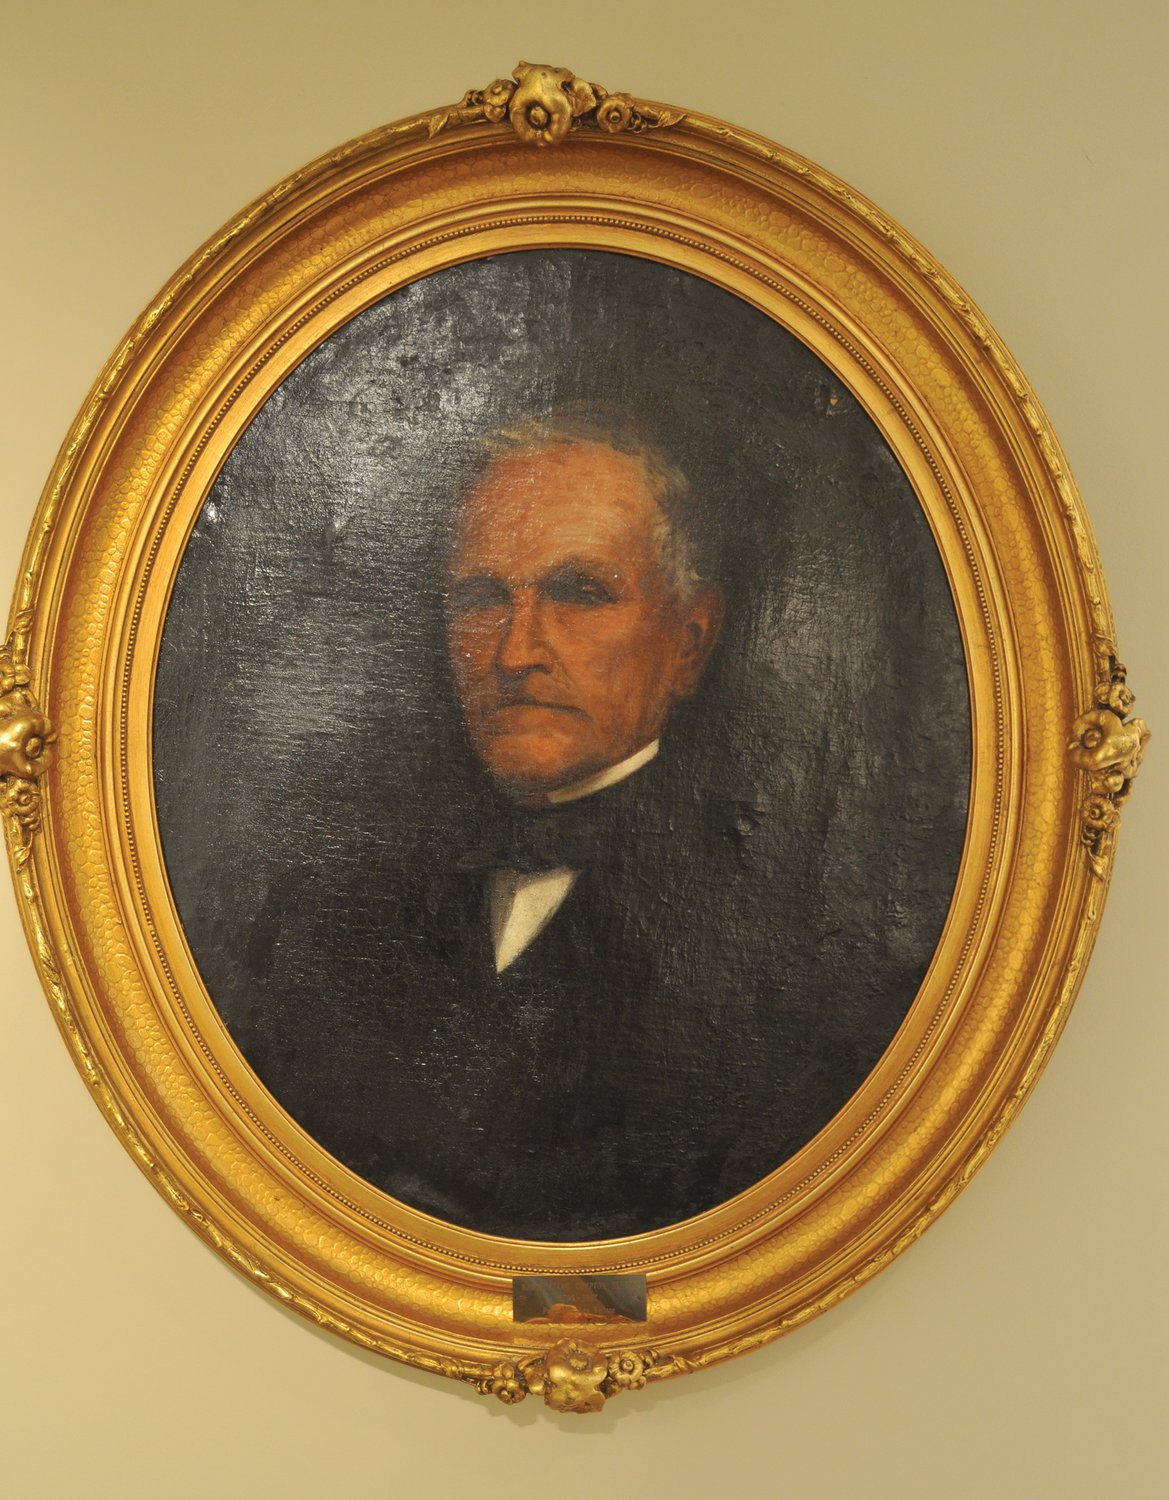 A portrait of Isaac C. Elston Sr., painted by son-in-law Lew Wallace, is believed to be the only painting Wallace signed. The portrait is featured in an upcoming exhibit on Wallace